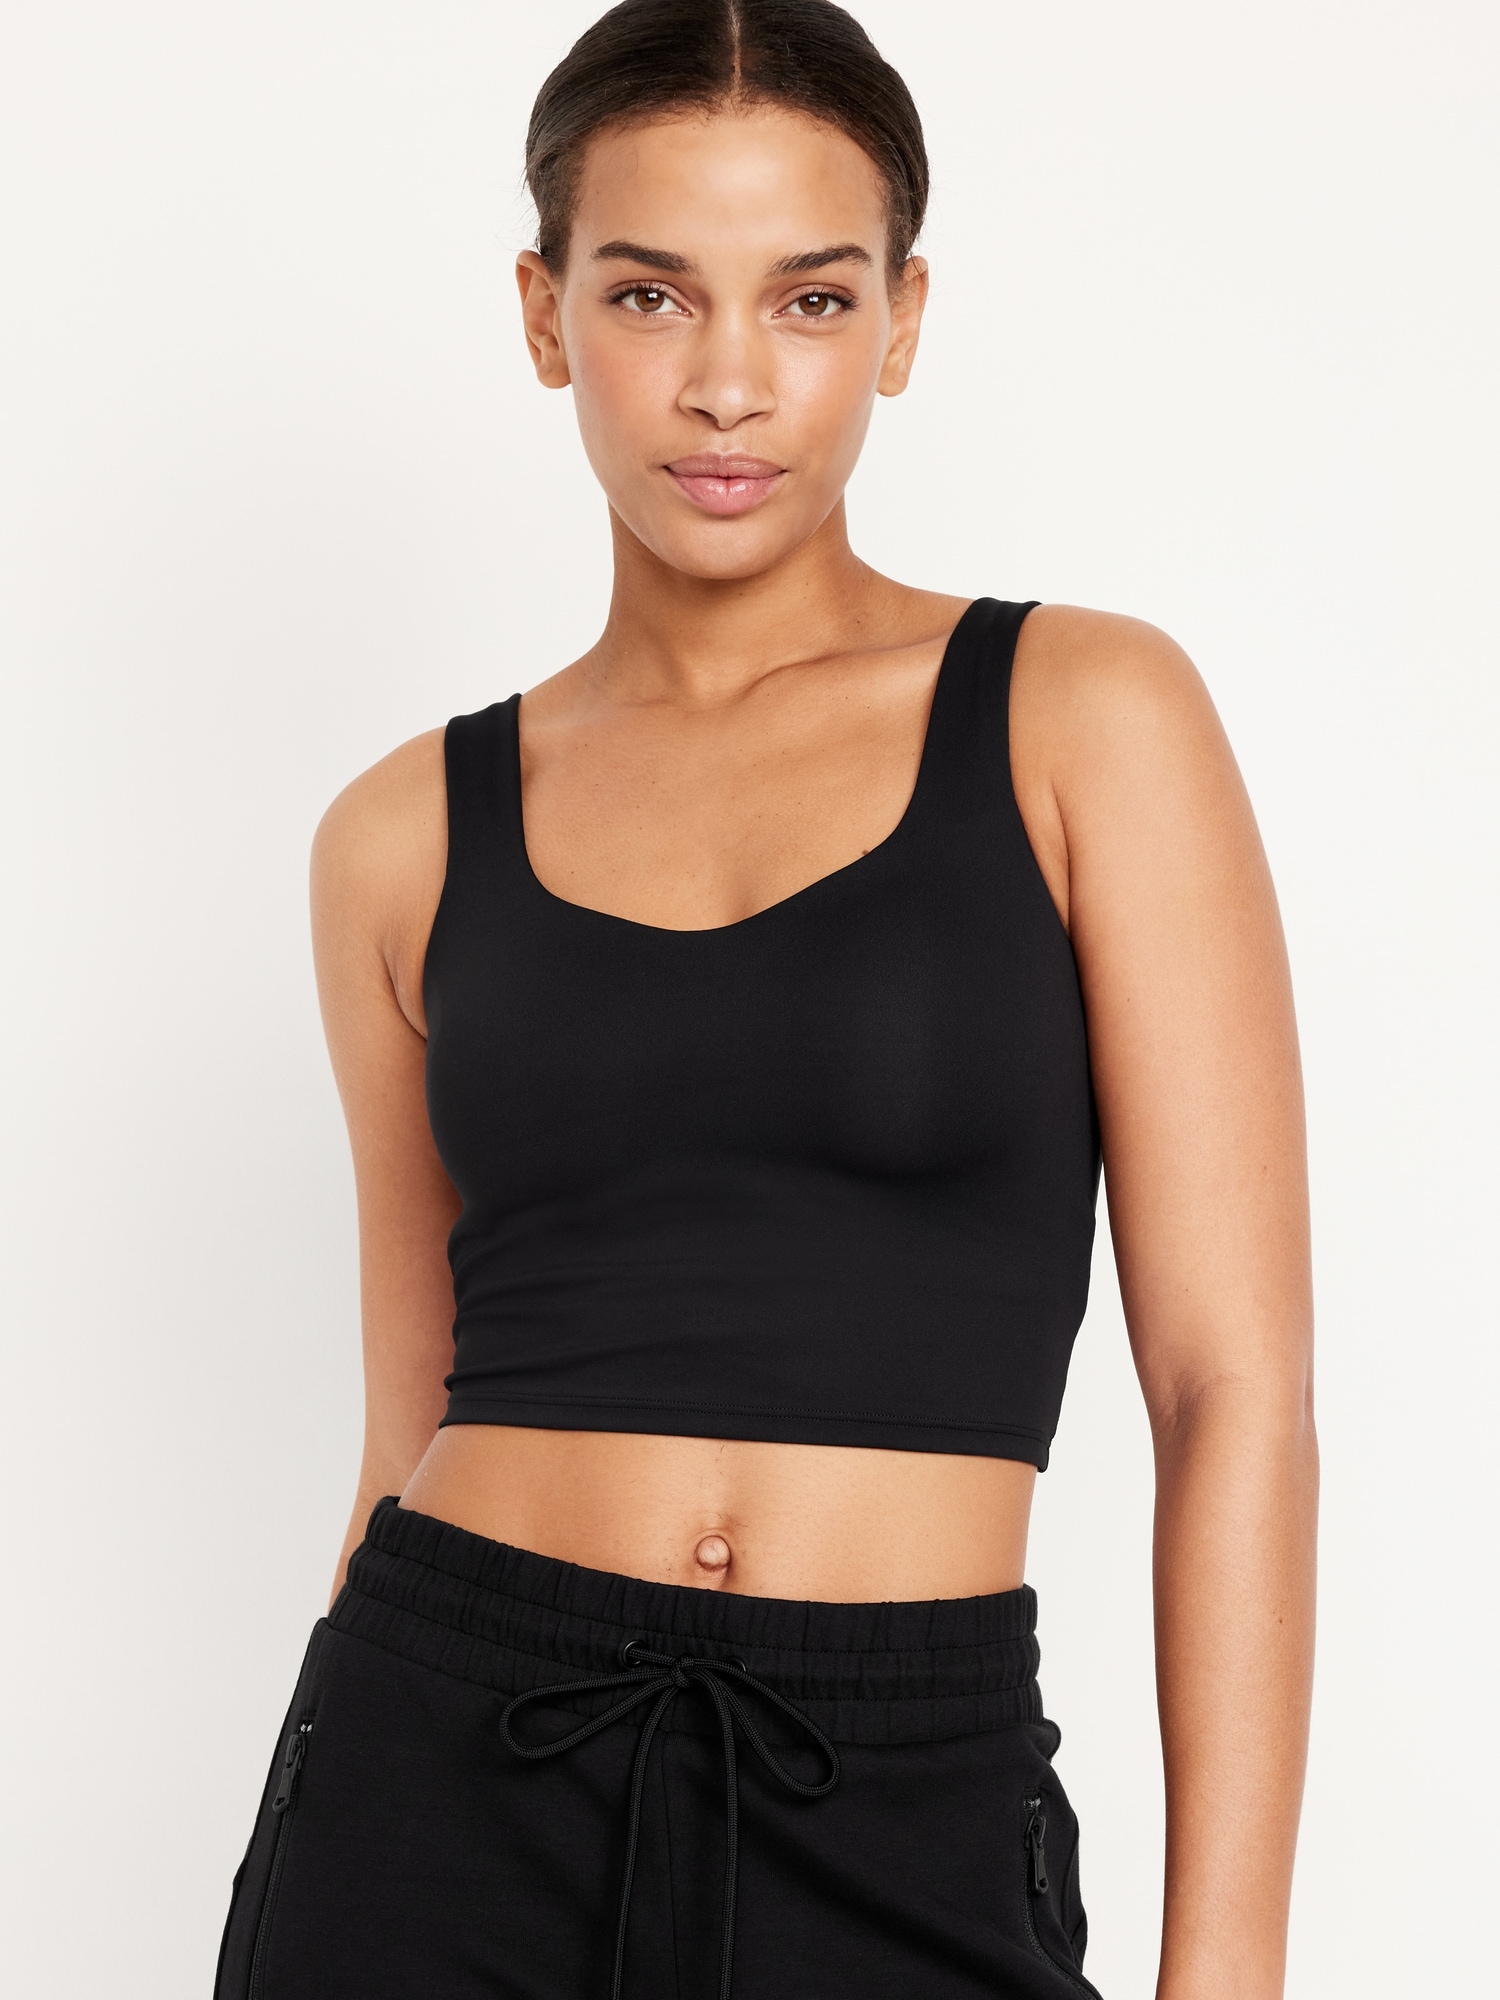 Page 8  91,000+ Sports Bra Tank Pictures